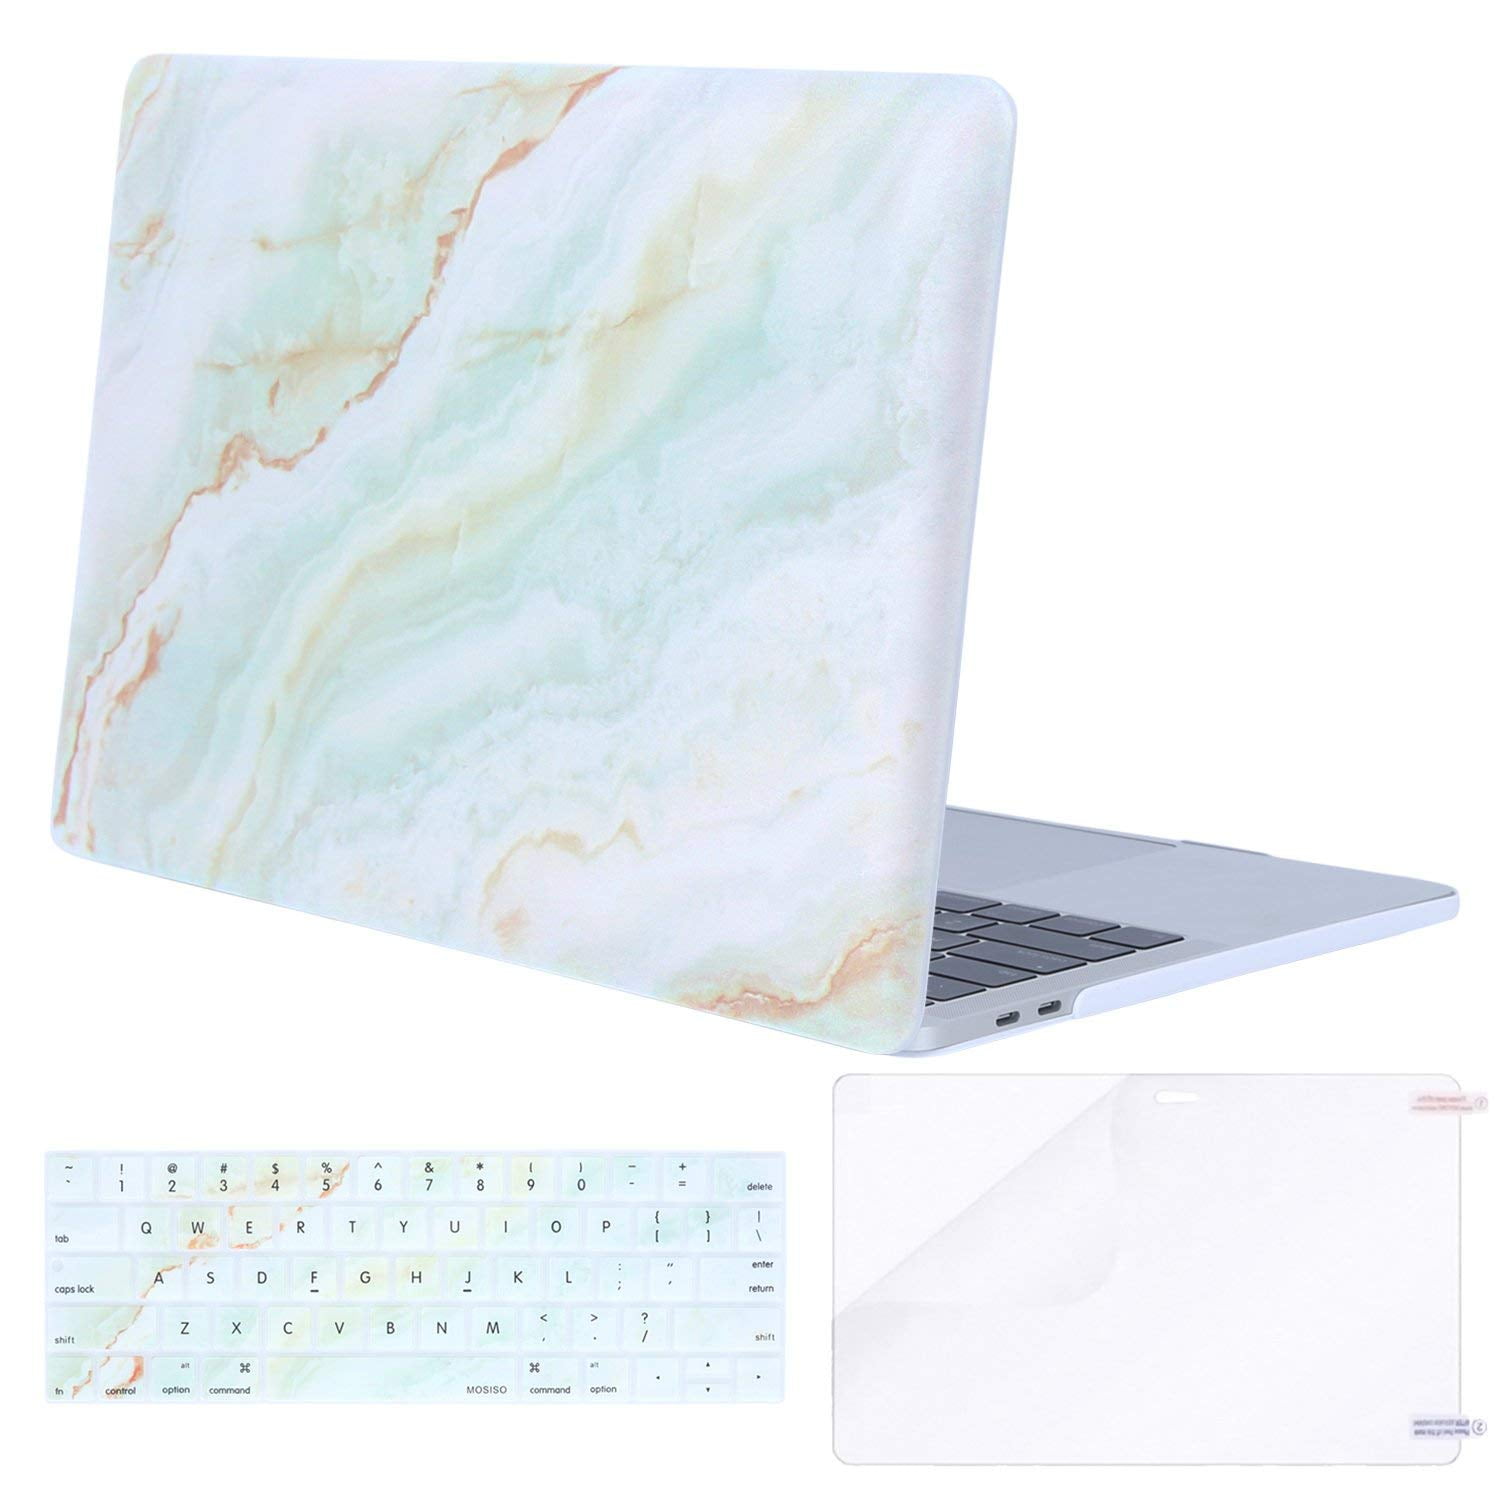 Marble A1989 Macbook Pro 13 inch Case Apple MBP Mac A1706 A1708 White Pink Gold 2018 2017 2016 Release Retina with/Without Touch Bar and Touch ID Hard Plastic Shell Laptop Accessories Cover 